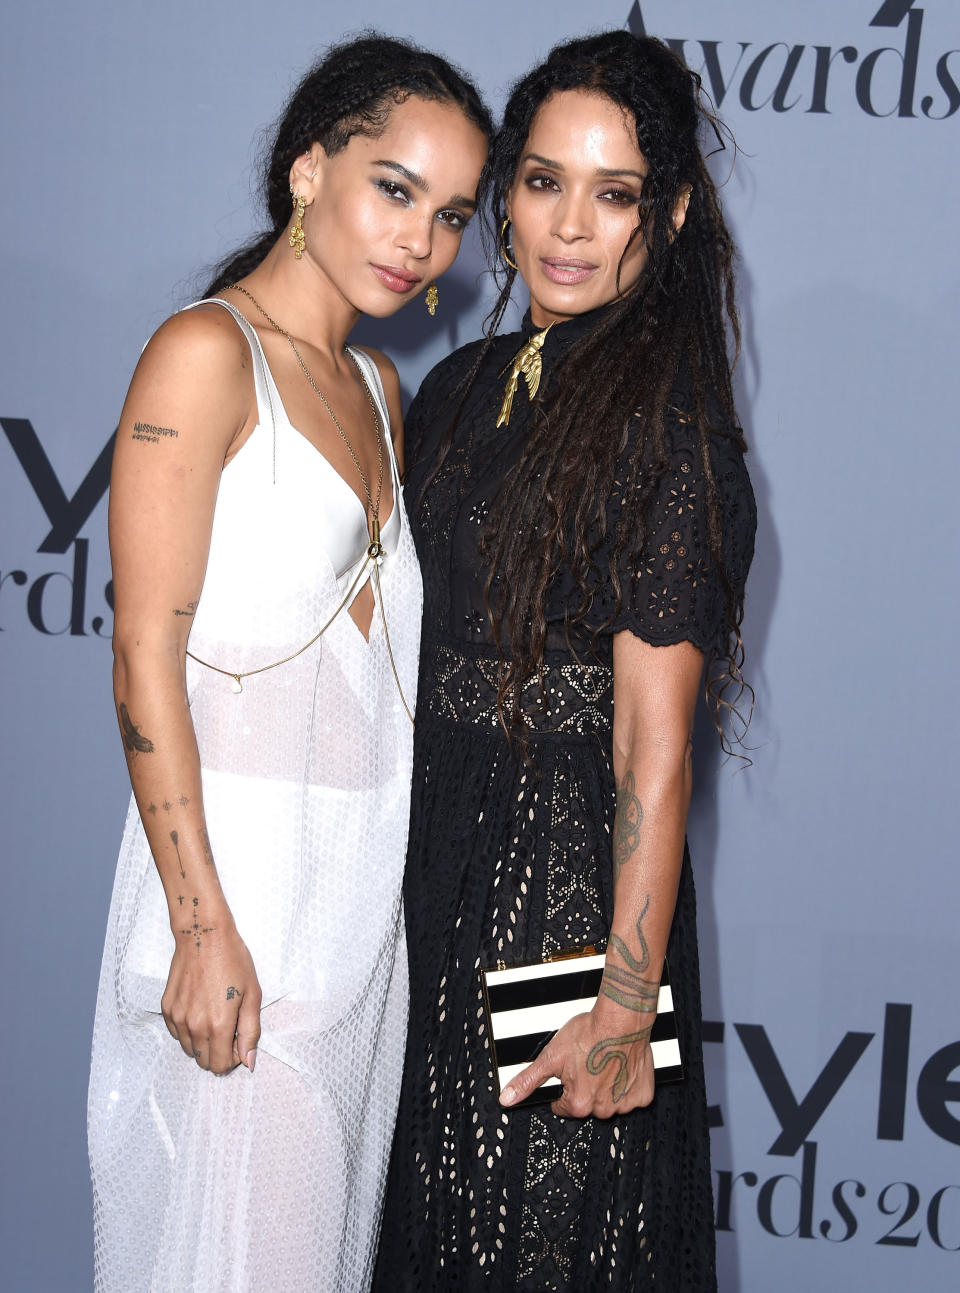 Zoe Kravitz and Lisa Bonet arrives at the InStyle Awards at Getty Center on October 26, 2015. (Photo by Steve Granitz/WireImage) | WireImage—2015 Steve Granitz